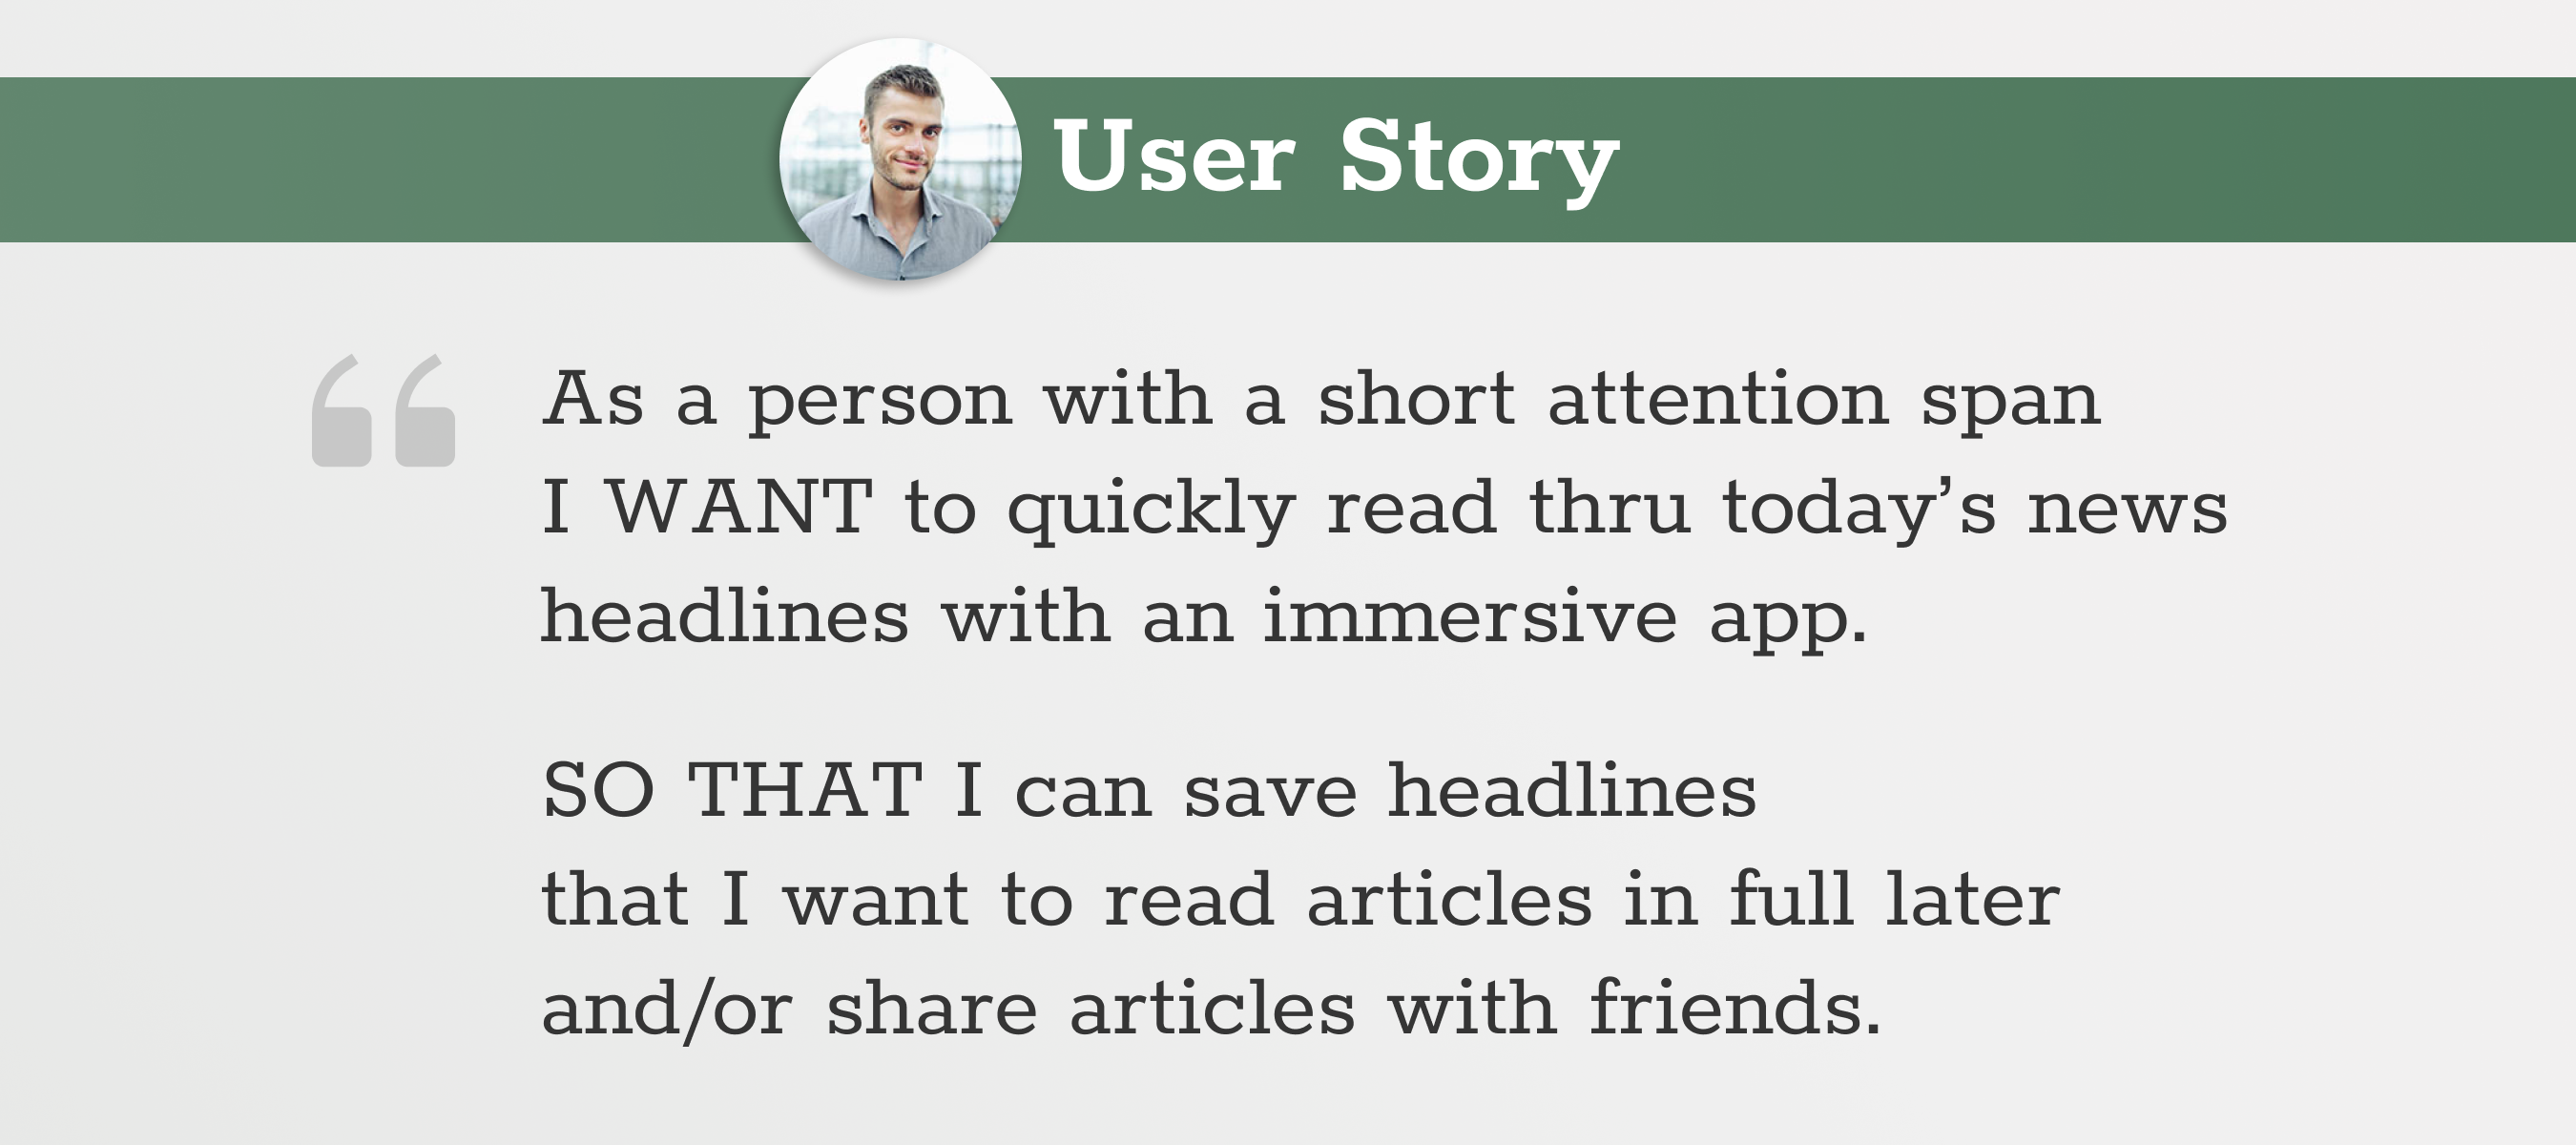 Photo of User Story that reads: "As a person with a short attention span I WANT to quickly read thru today’s news headlines with an immersive app. SO THAT I can save headlines that I want to read articles in full later and/or share articles with friends."